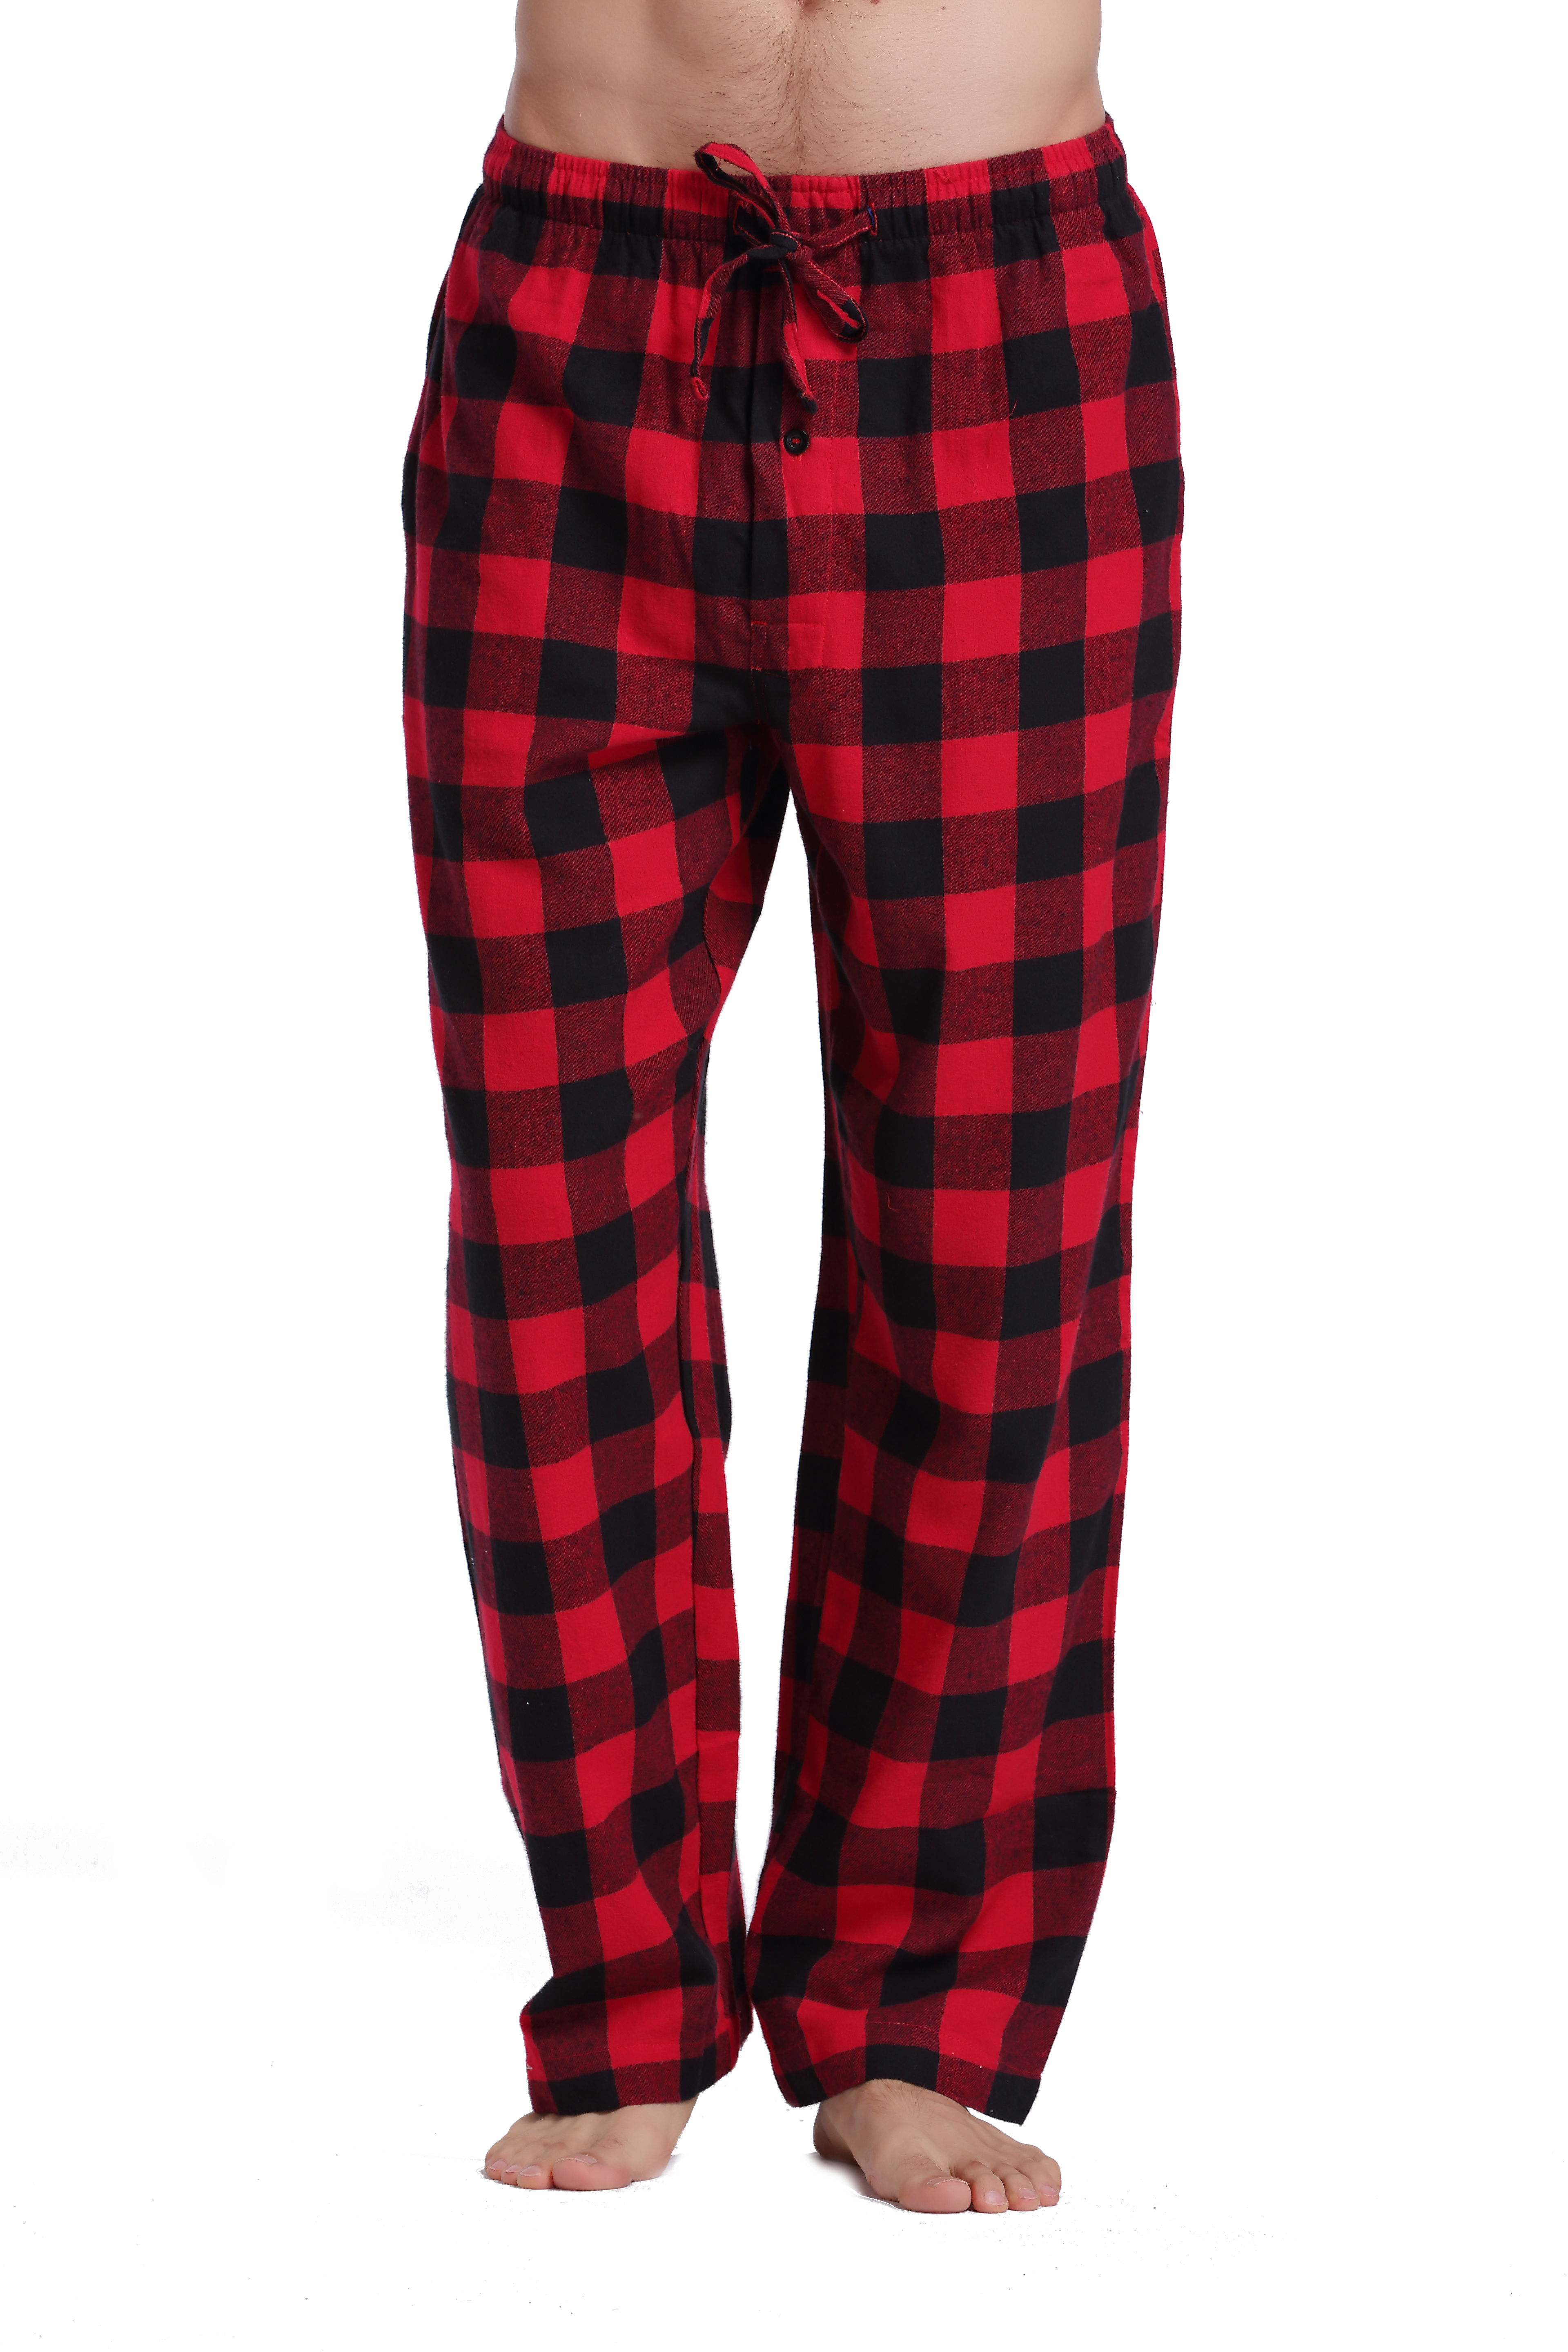 Cyber Monday: Men's 100% Cotton Pajama Pants - From $8.25 ...